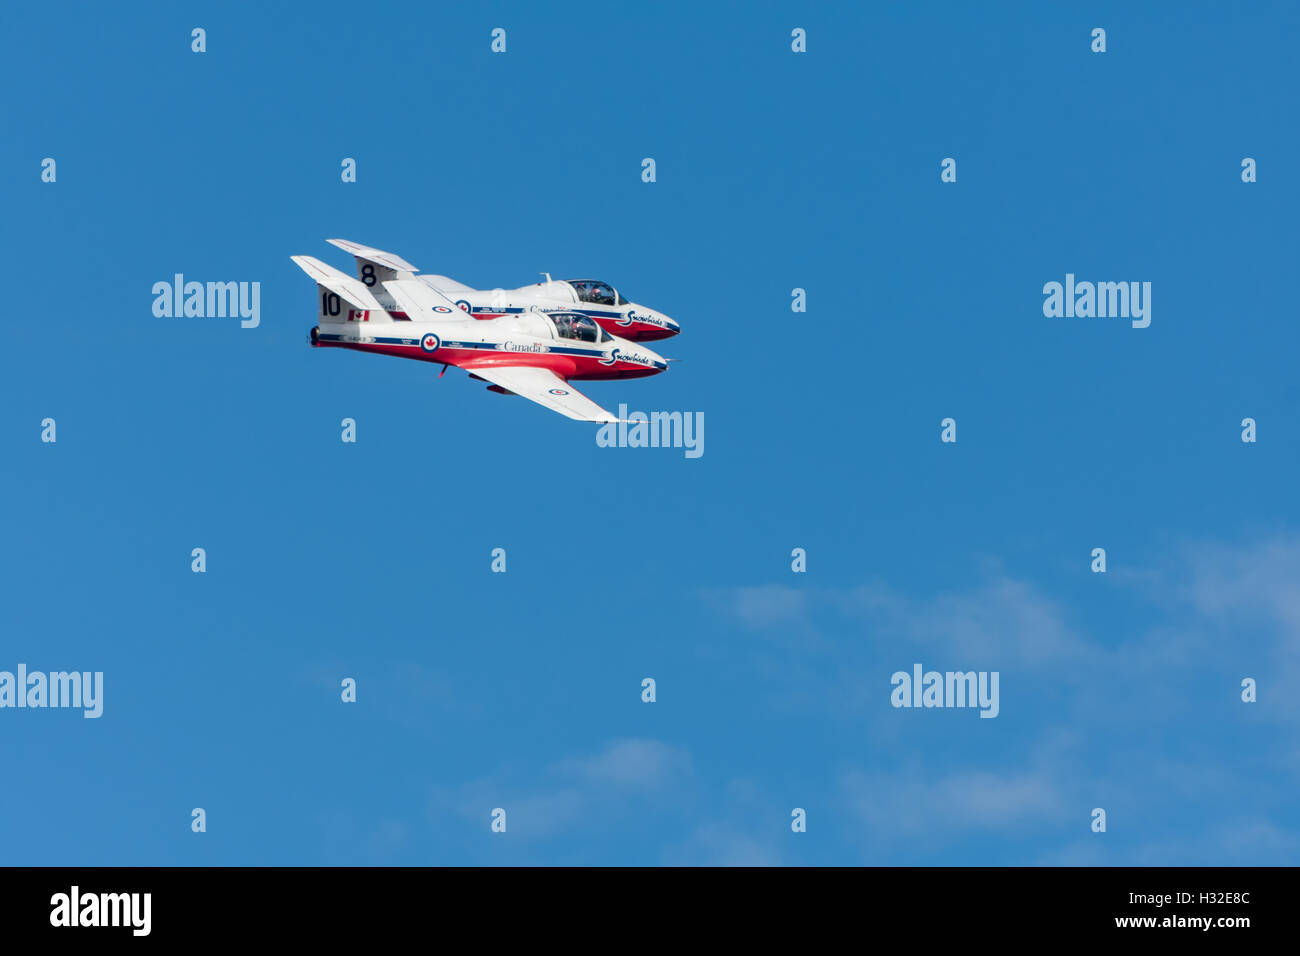 Canada SnowBirds 2 jets flying in formation Stock Photo